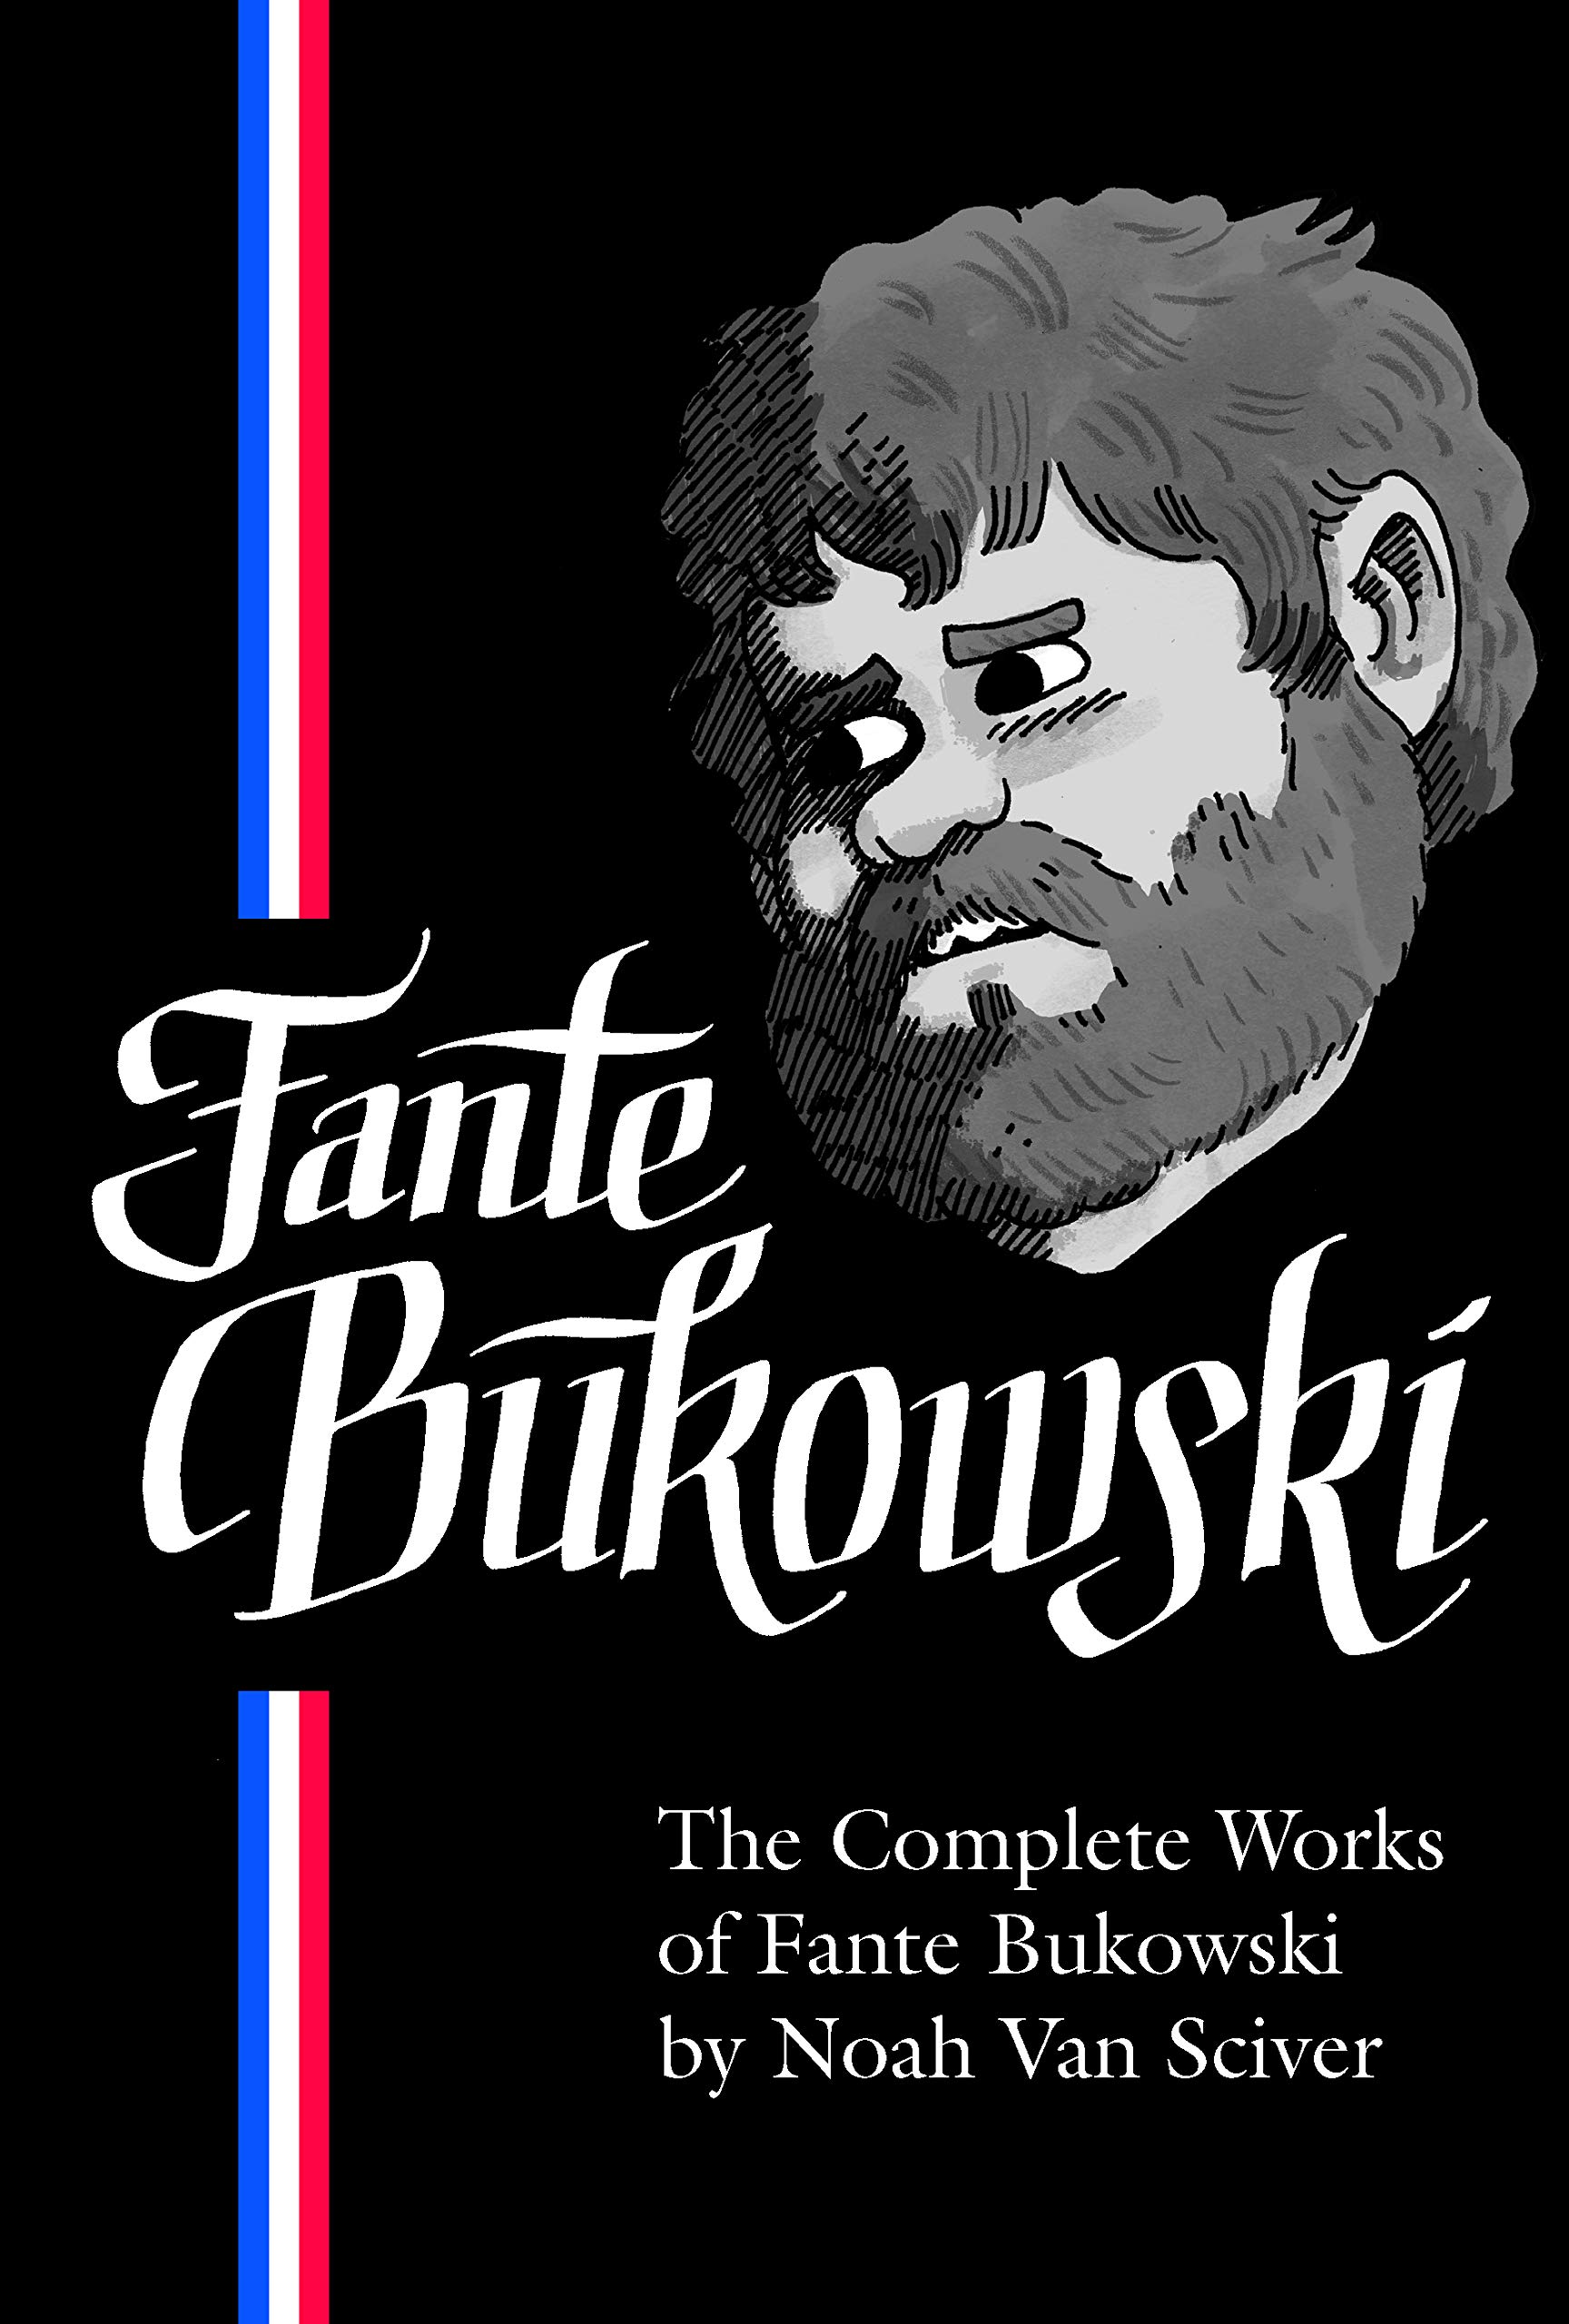 Graphic Novels for Winter 2020: The Complete Works of Fante Bukowski